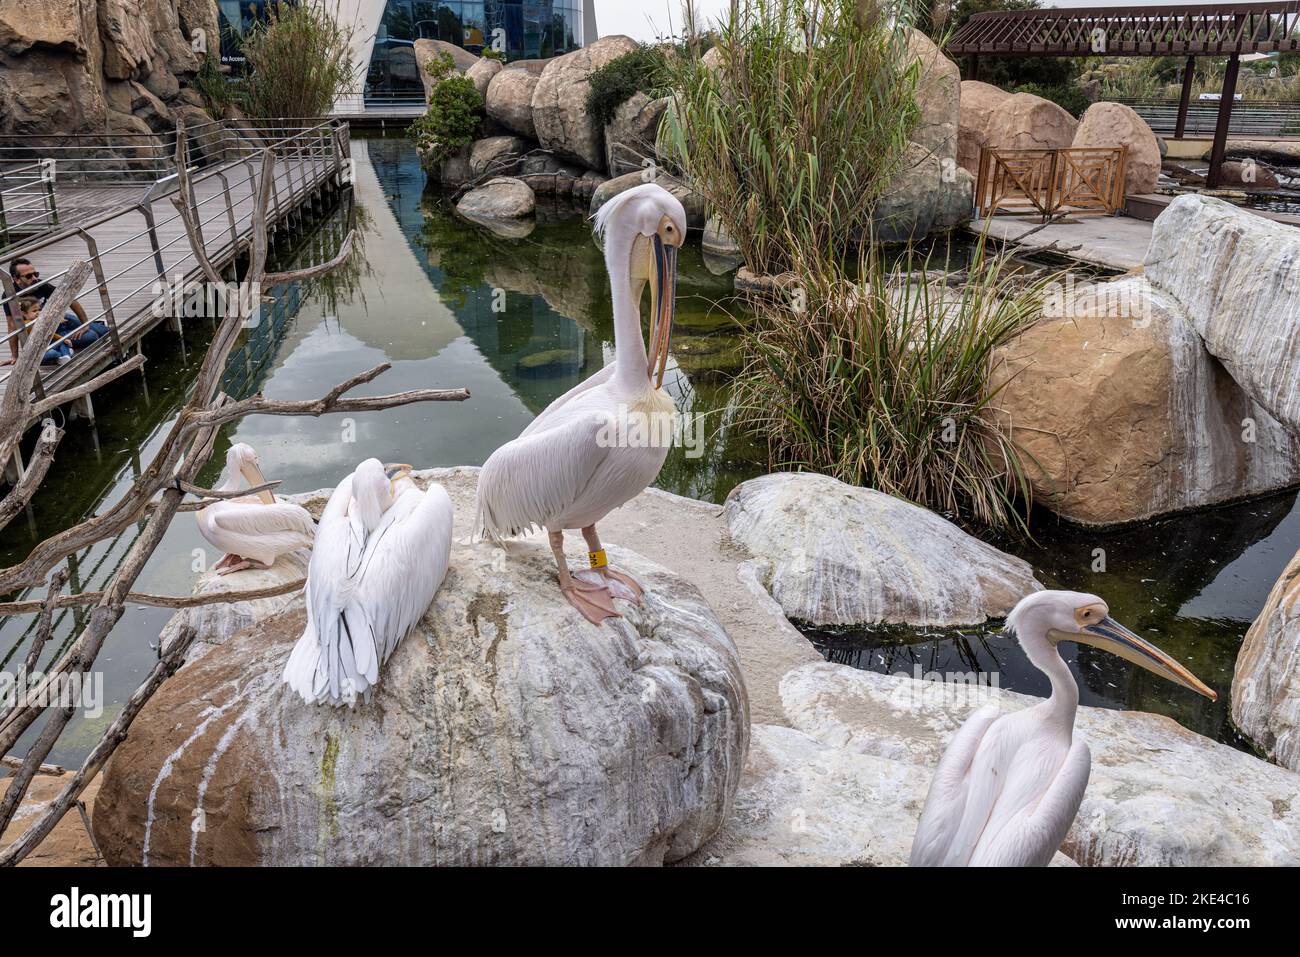 Great White Pelicans, Oceanografic., City of Arts and Science, Valencia, Spain Stock Photo